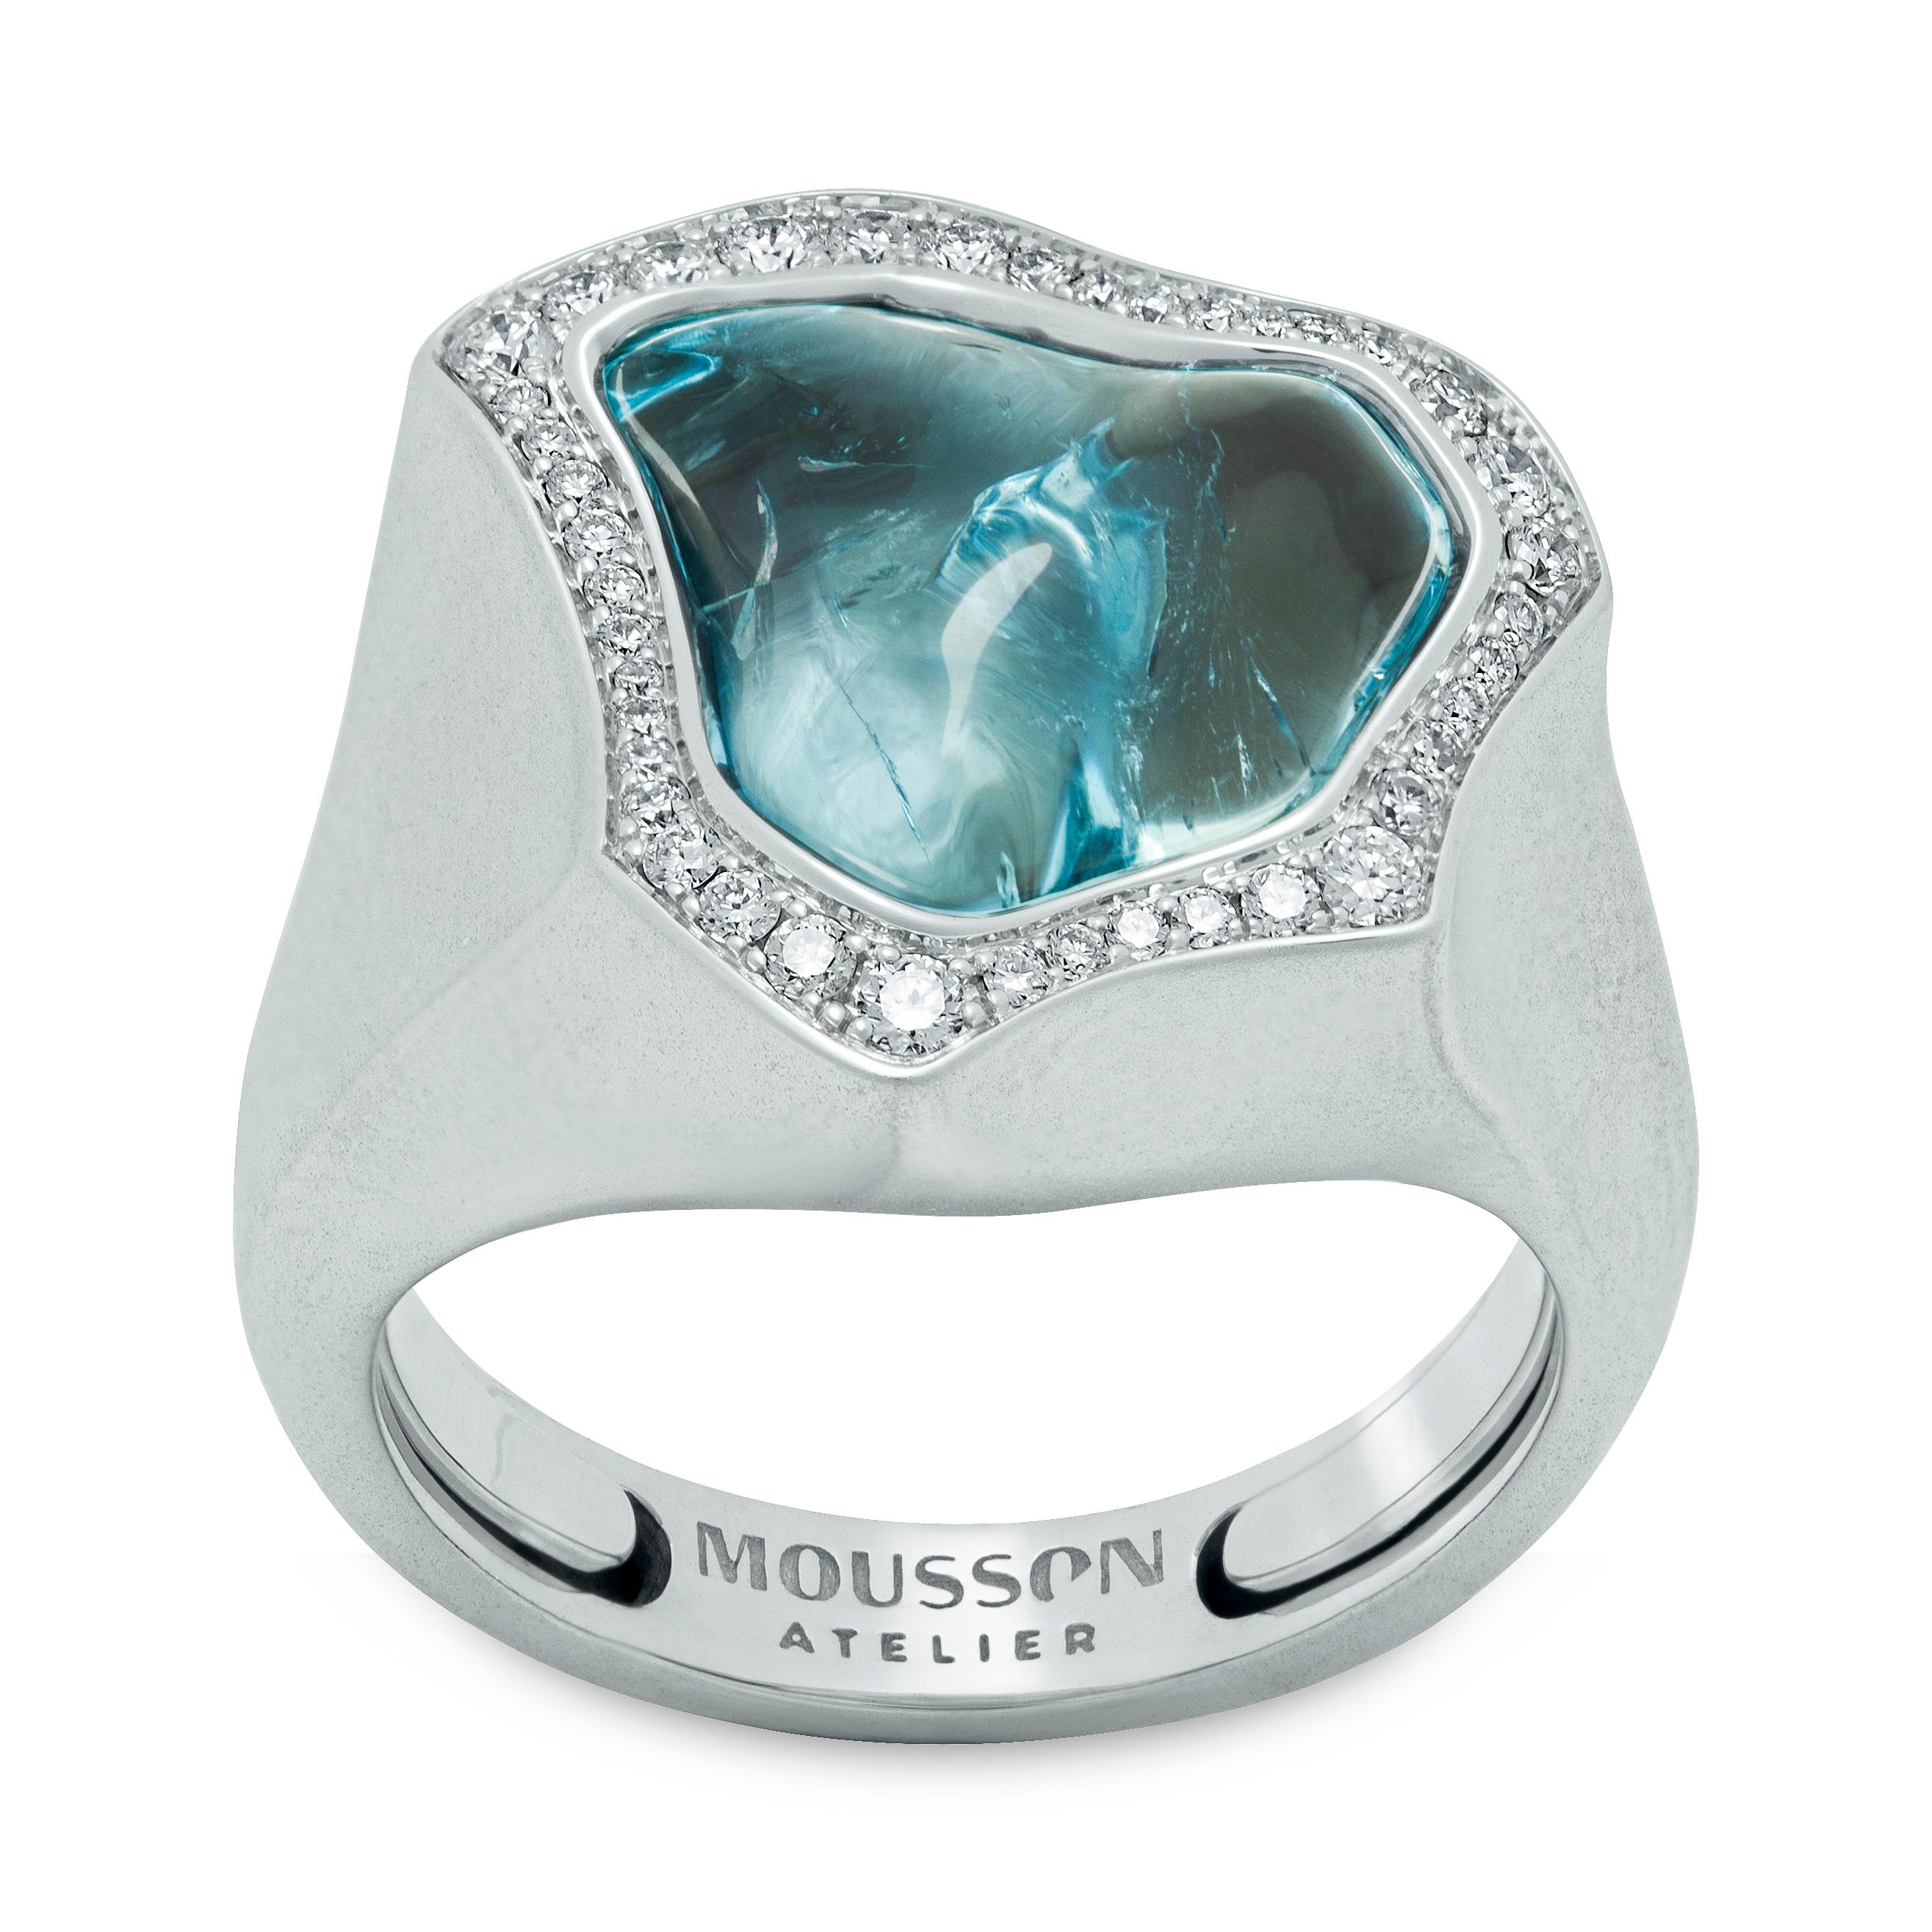 Aquamarine 6.21 Carat Diamonds 18 Karat White Matte Gold Spectrum Ring

Exquisite and stylish, this 18K White Gold, Aquamarine, Diamonds Ring from the Spectrum collection is sure to draw attention. A stunning baroque-shaped Aquamarine is exquisitely